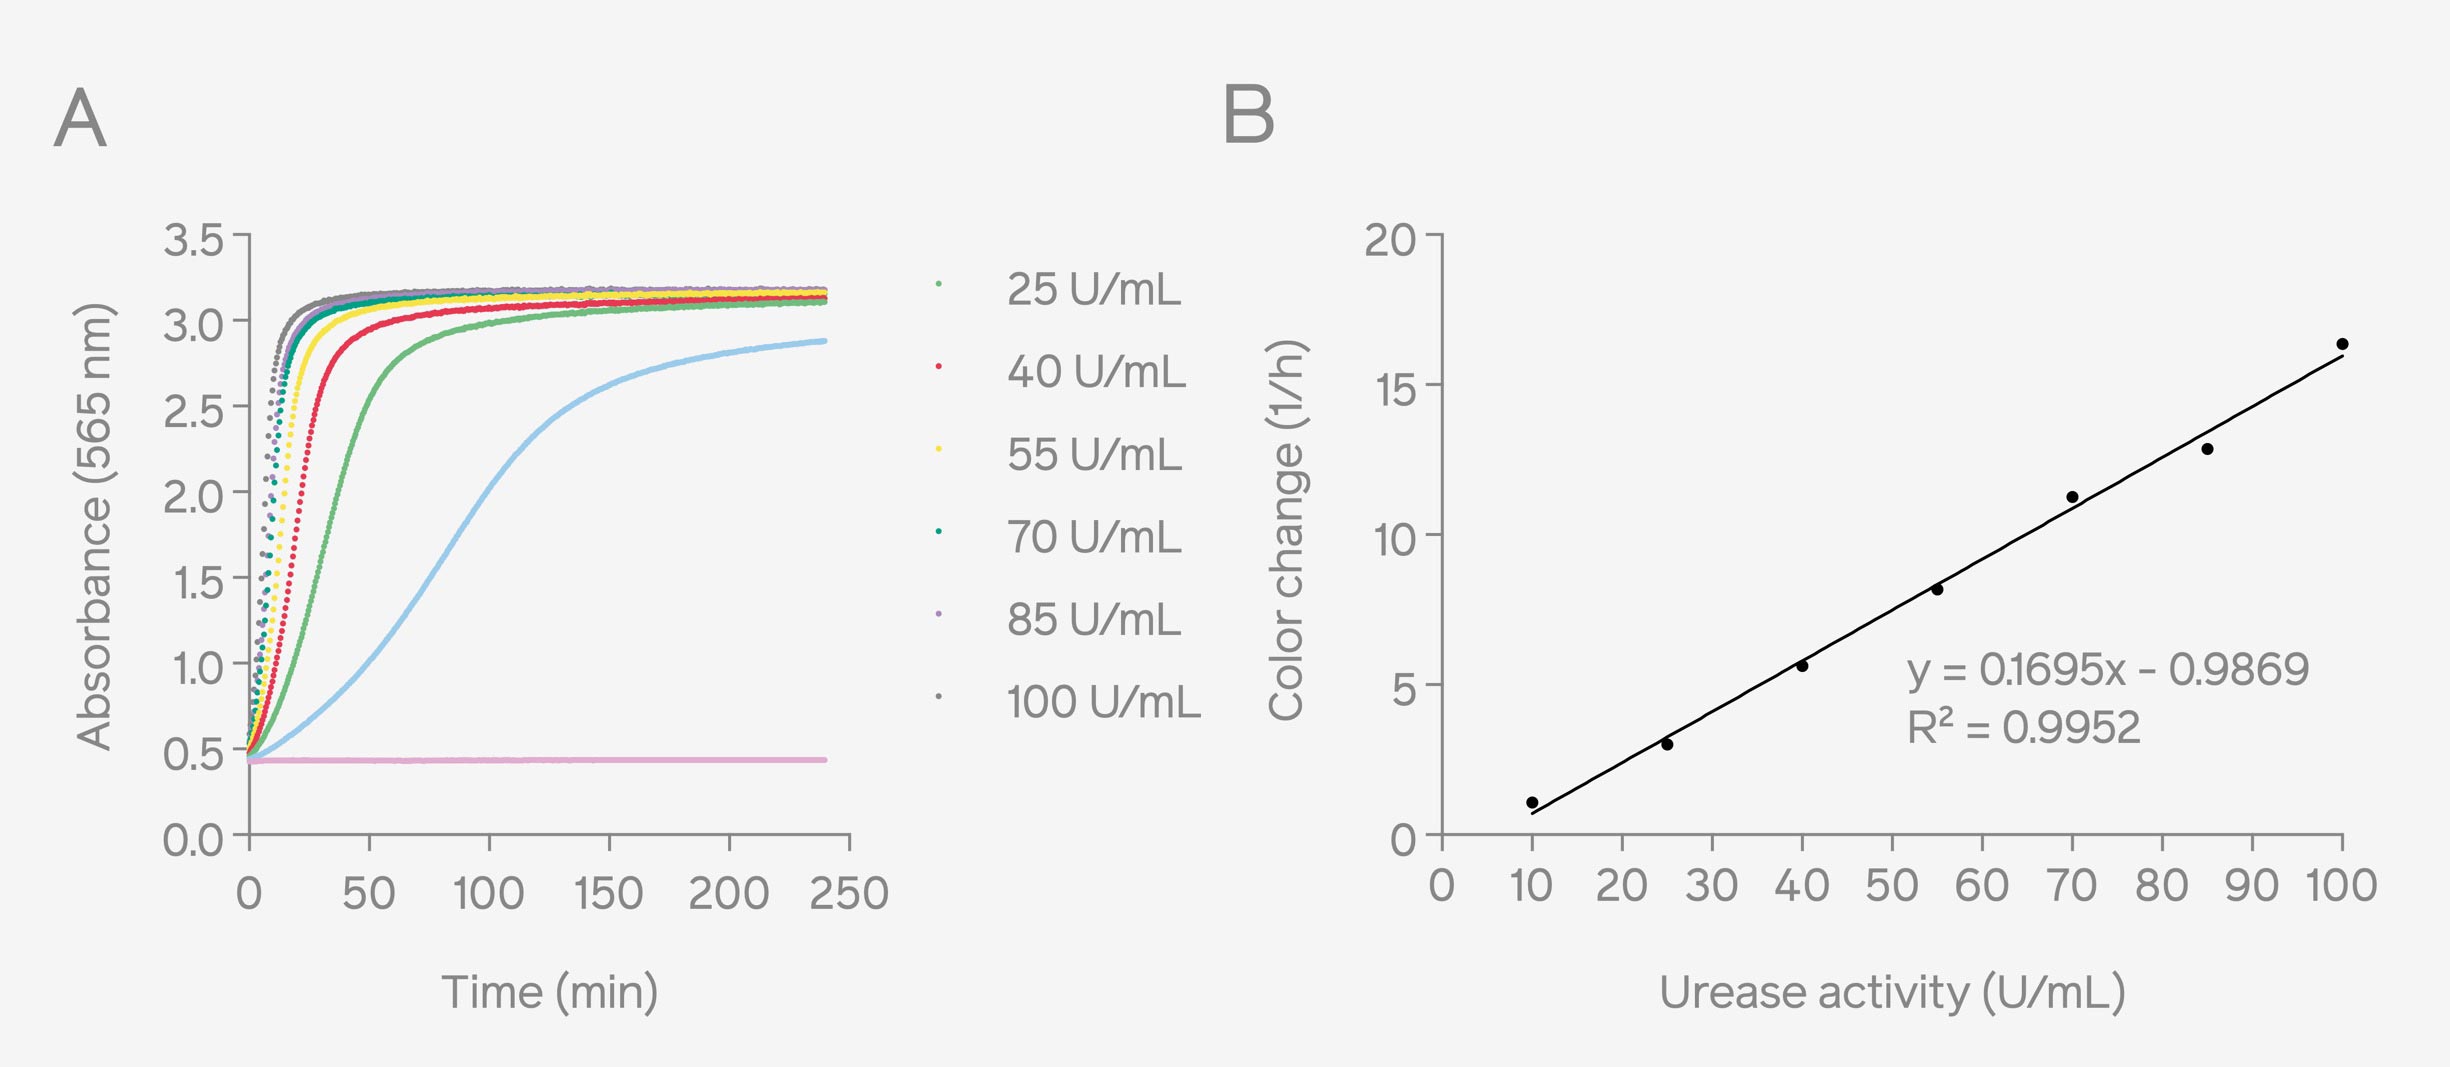 Figure 2: Absorbance curves of urease activity (U/mL) in Stuart’s broth measured at 562 nm by SpectraMax iD3 (A). Corresponding standard curve based on the color change rates and urease activities (10 – 100 U/mL), the color change rate was calculated by determining the maximum slope of the sigmoidal curve (B). Urease Activity: Kinetic Evaluation with Absorbance 96 Microplate Reader Byonoy